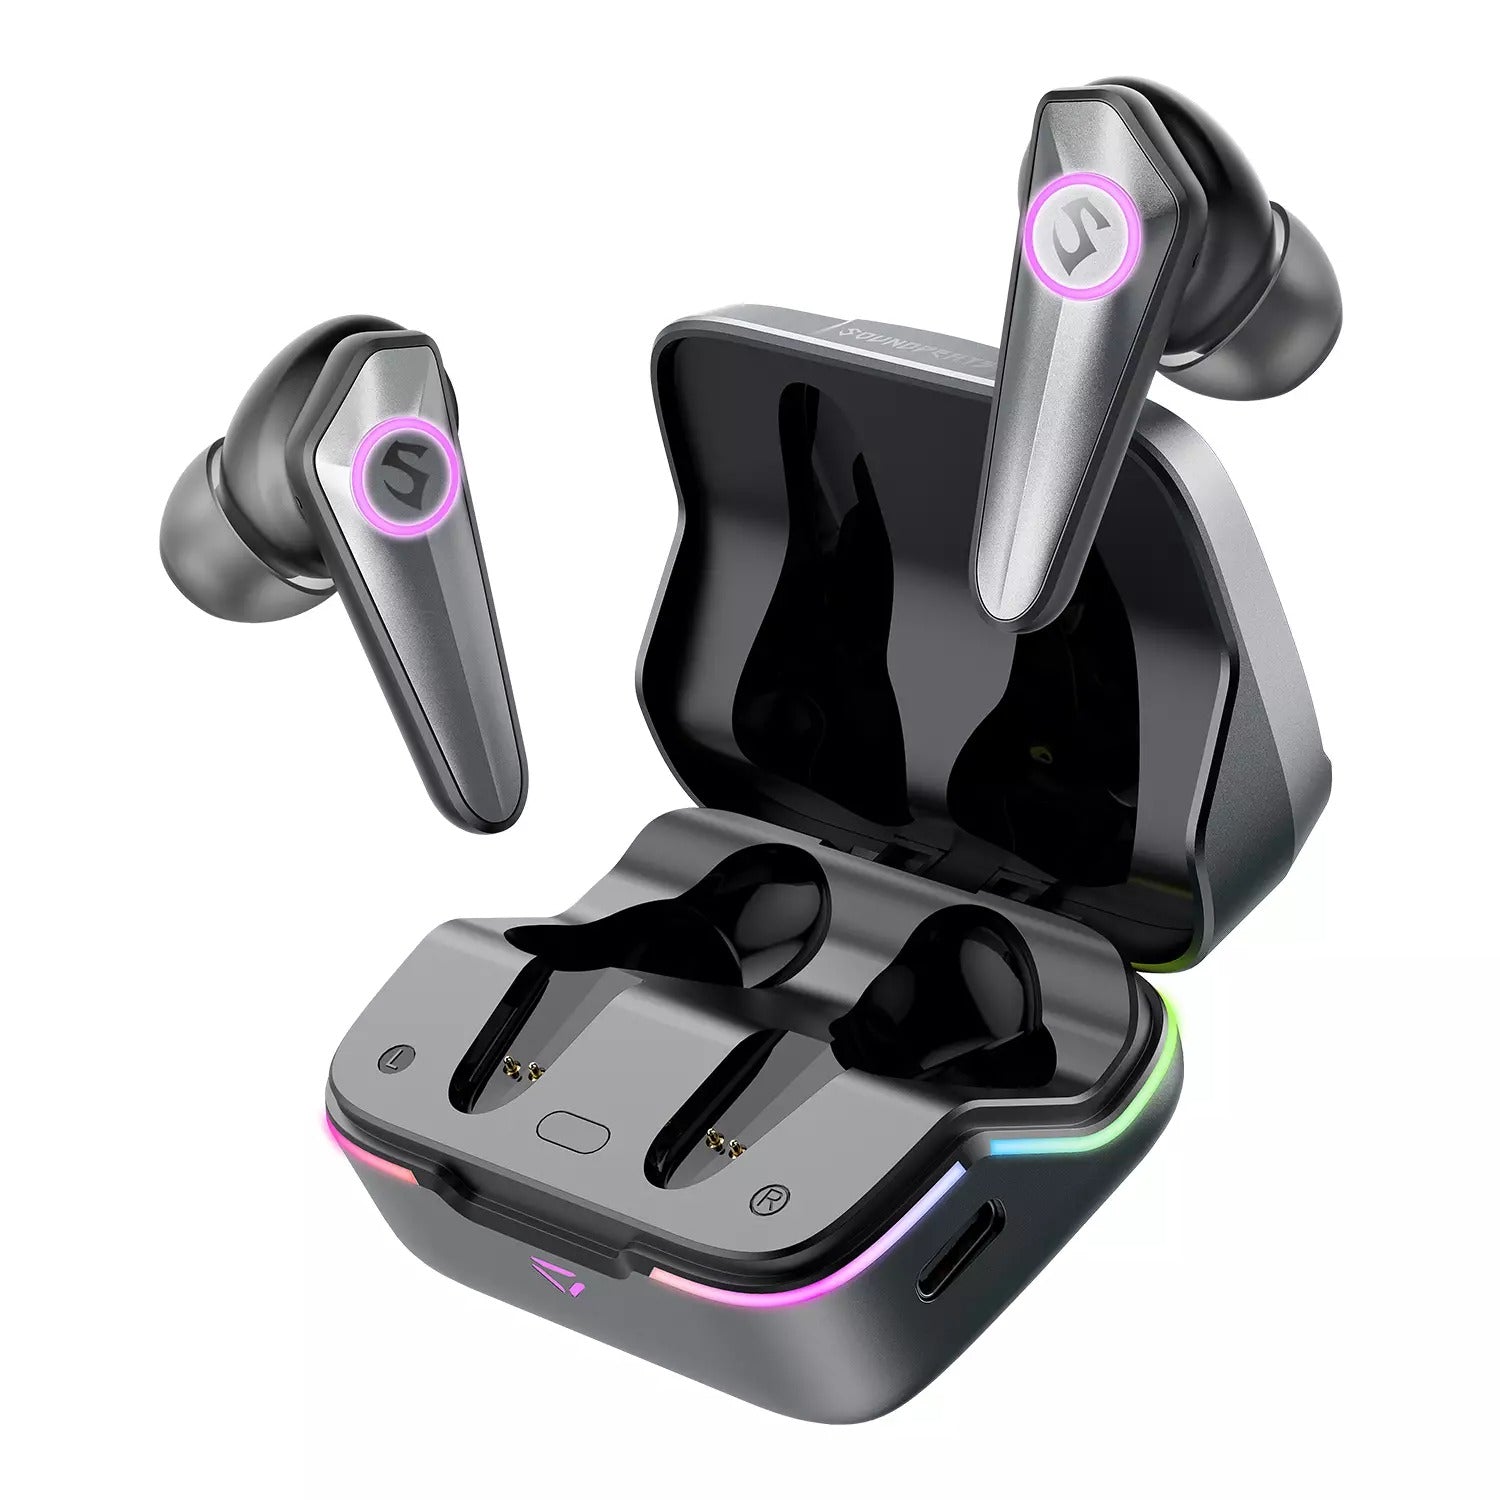 Soundpeats Gaming Wireless Earbuds Price in Pakistan